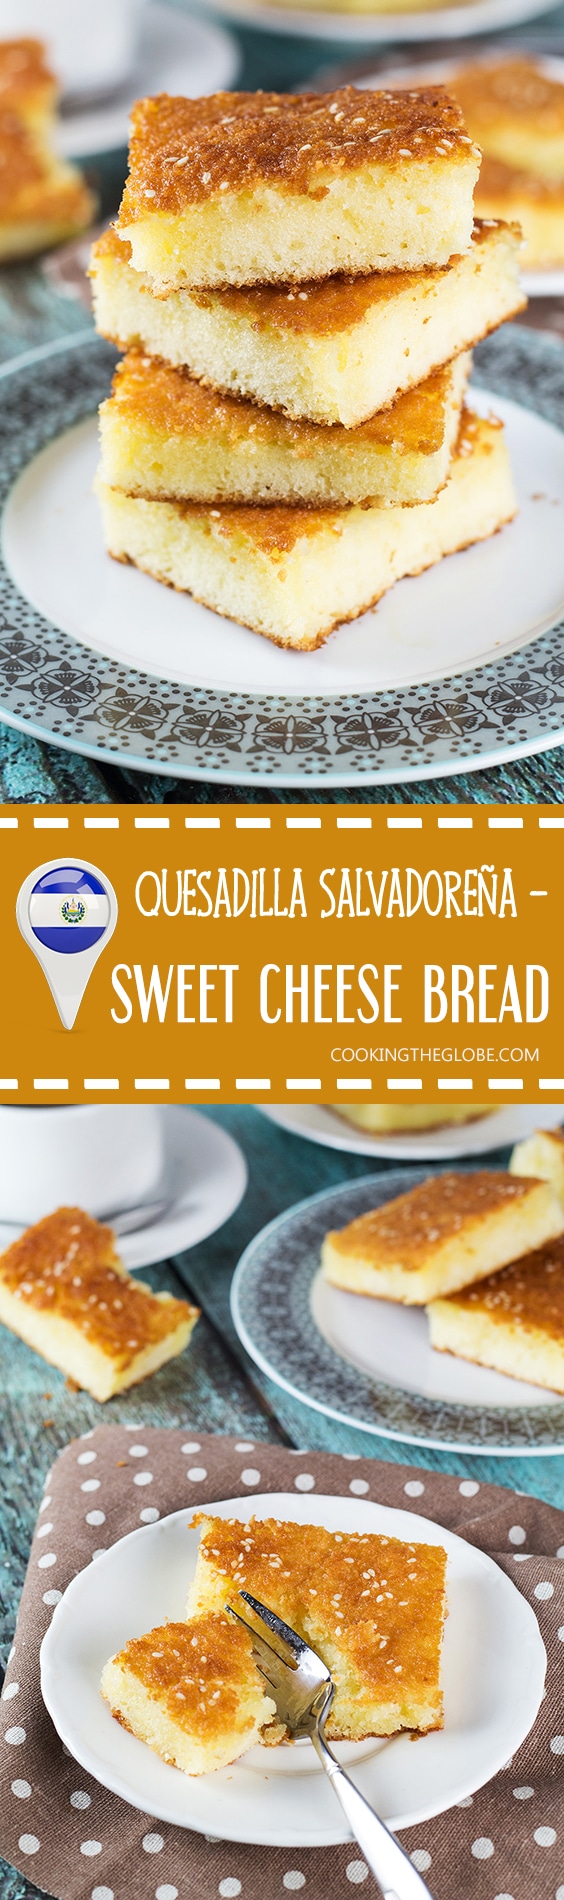 Quesadilla Salvadorena is not your ordinary quesadilla. This one is a dessert! A rich and crazy delicious sweet cheese bread / pound cake from El Salvador. So good! | cookingtheglobe.com